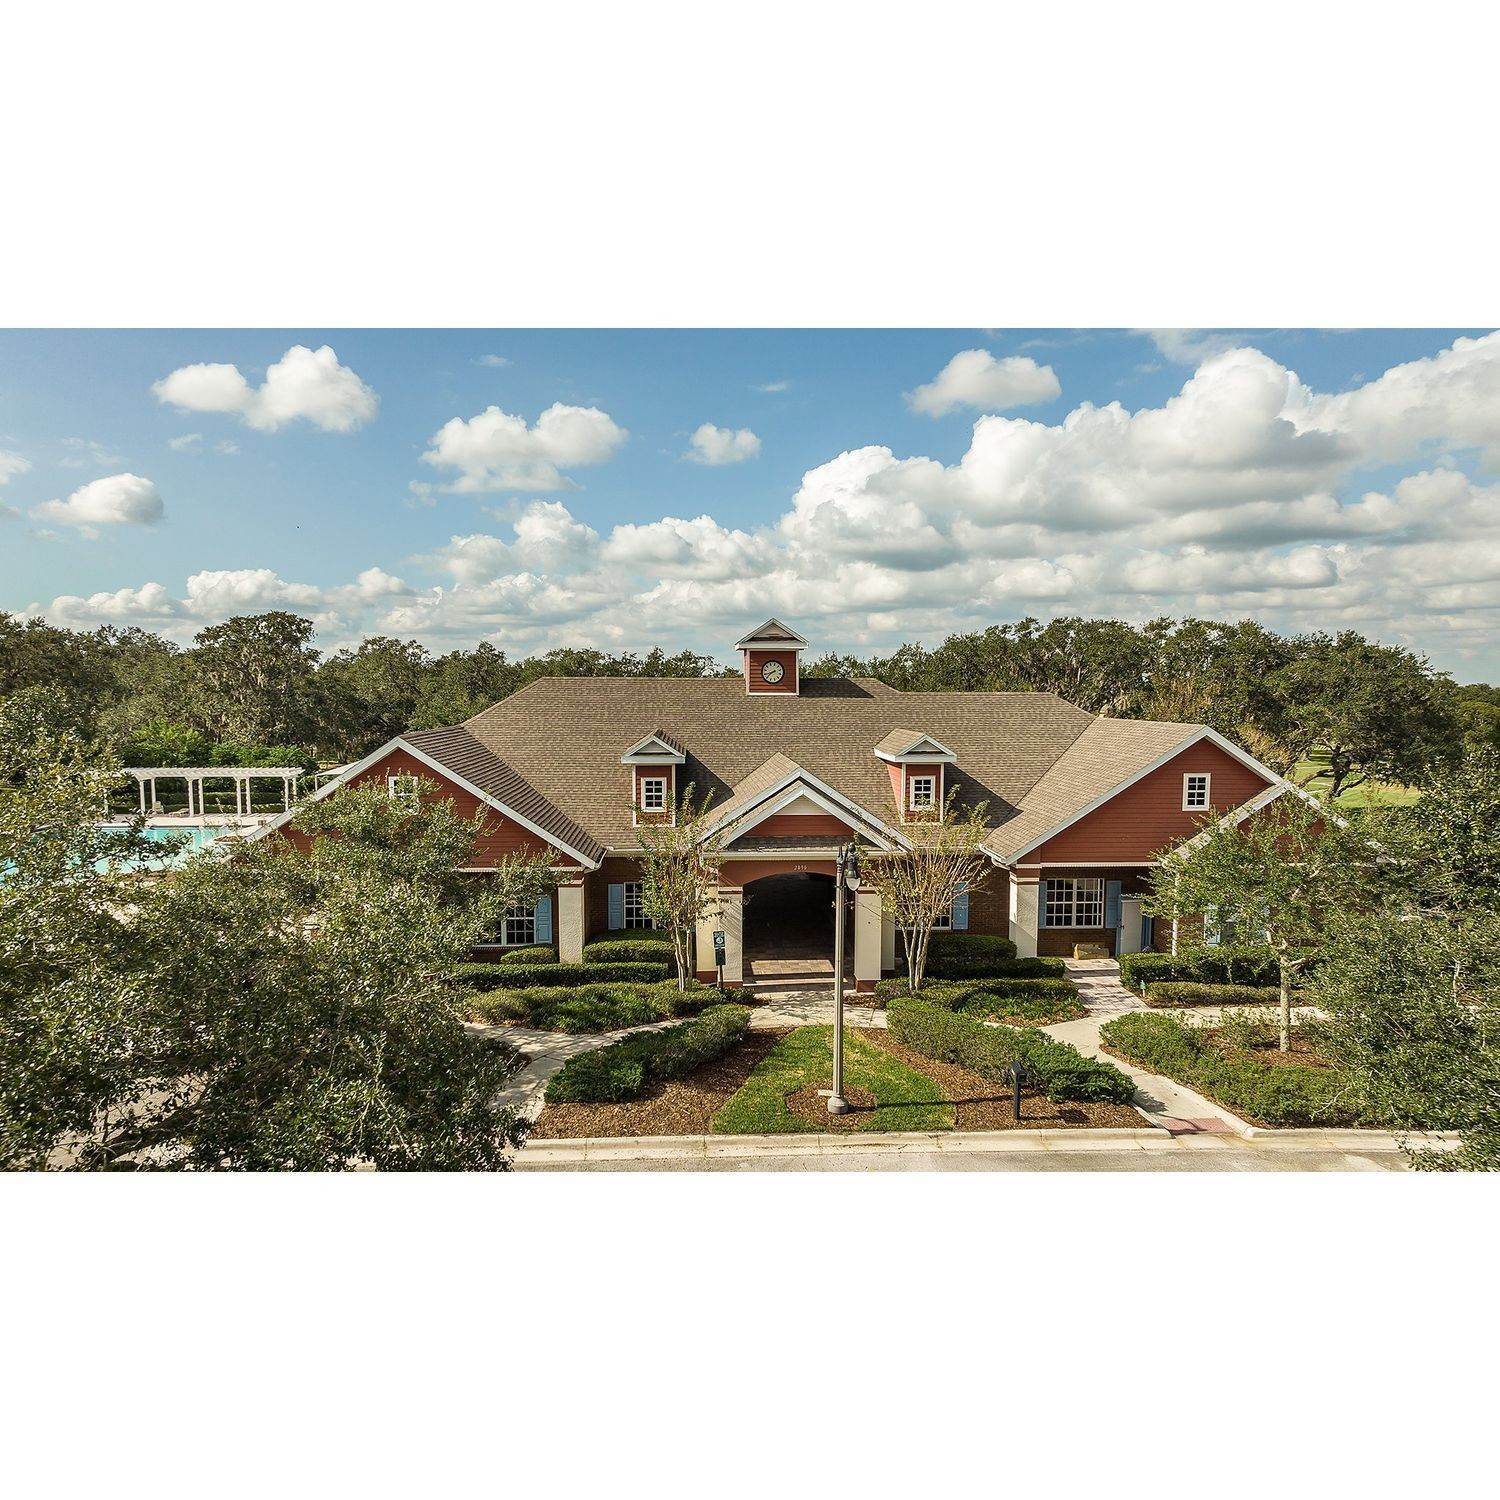 9. The Townhomes at Anthem Park Gebäude bei 4590 Calvary Way, St. Cloud, FL 34769